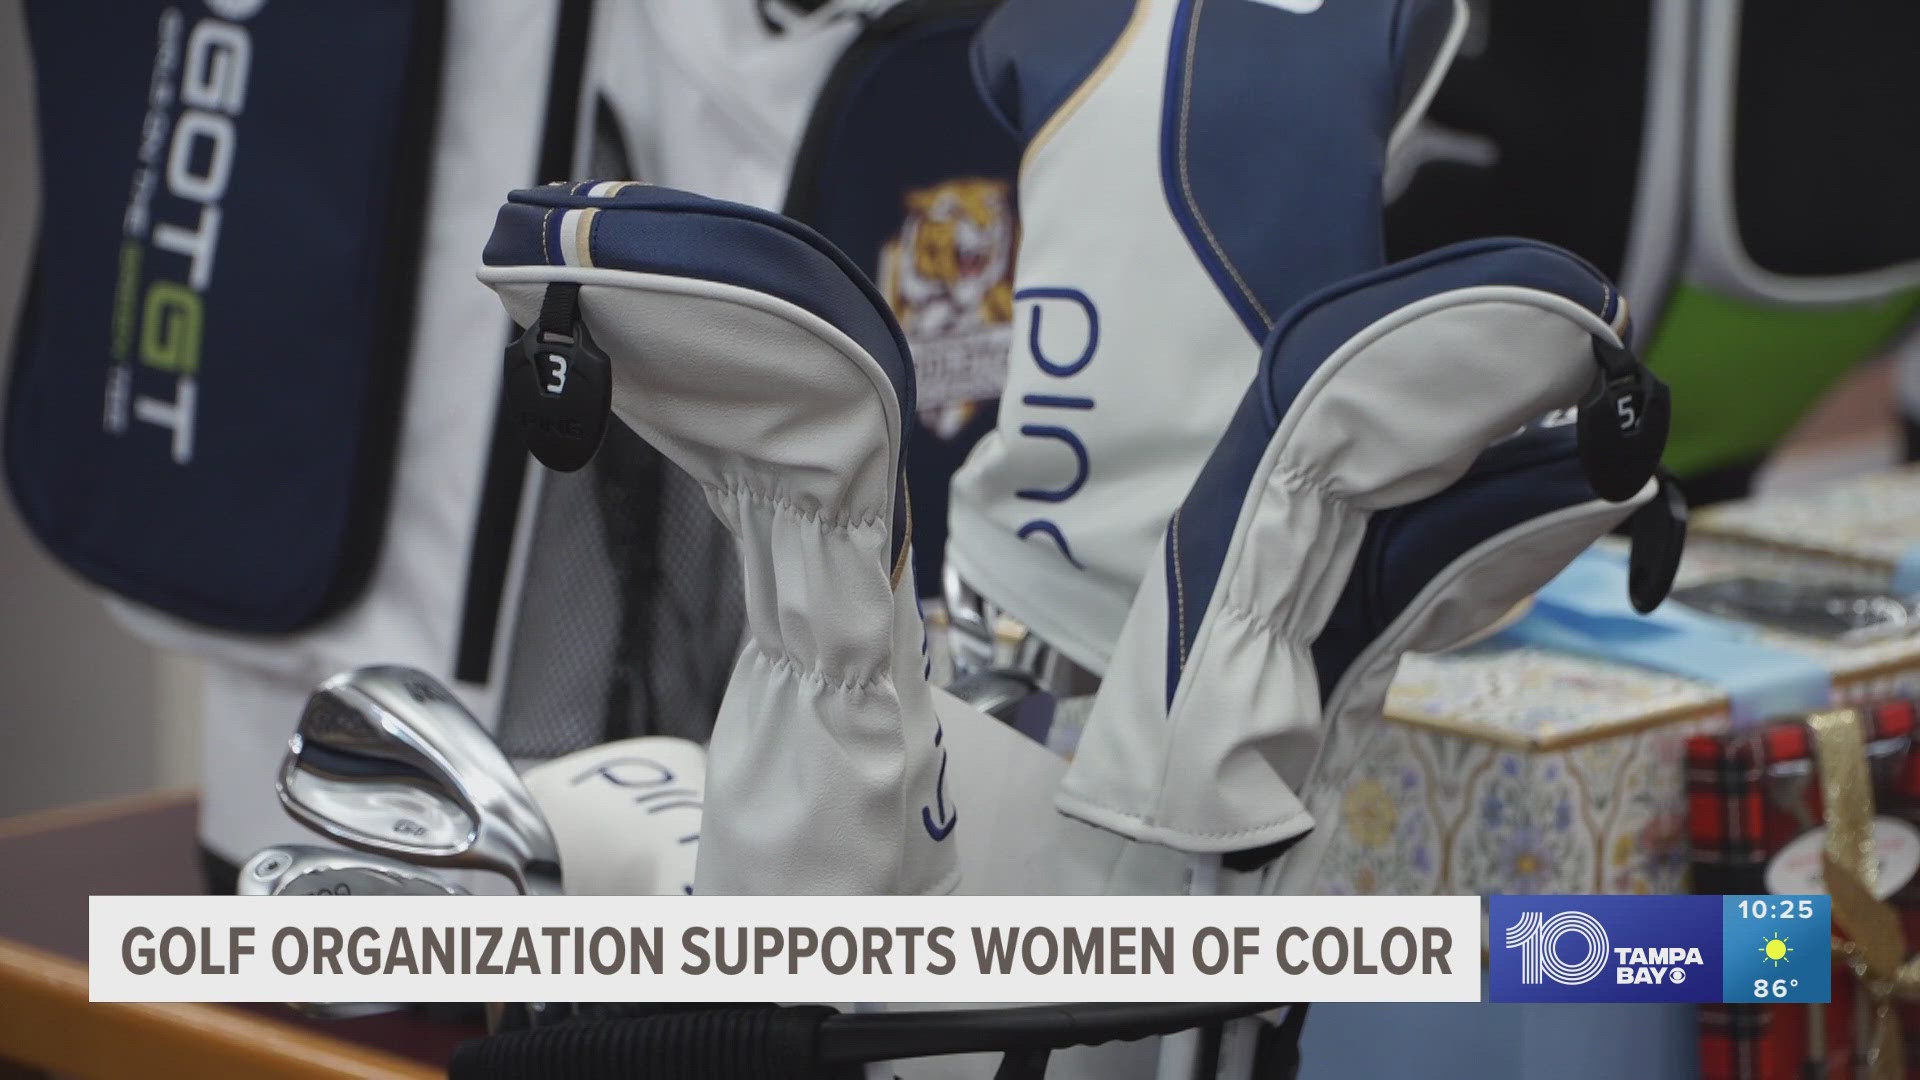 Middleton High School girls' golf team received $14,000 in new equipment from a partnership between two groups hoping to increase diversity in the sport.